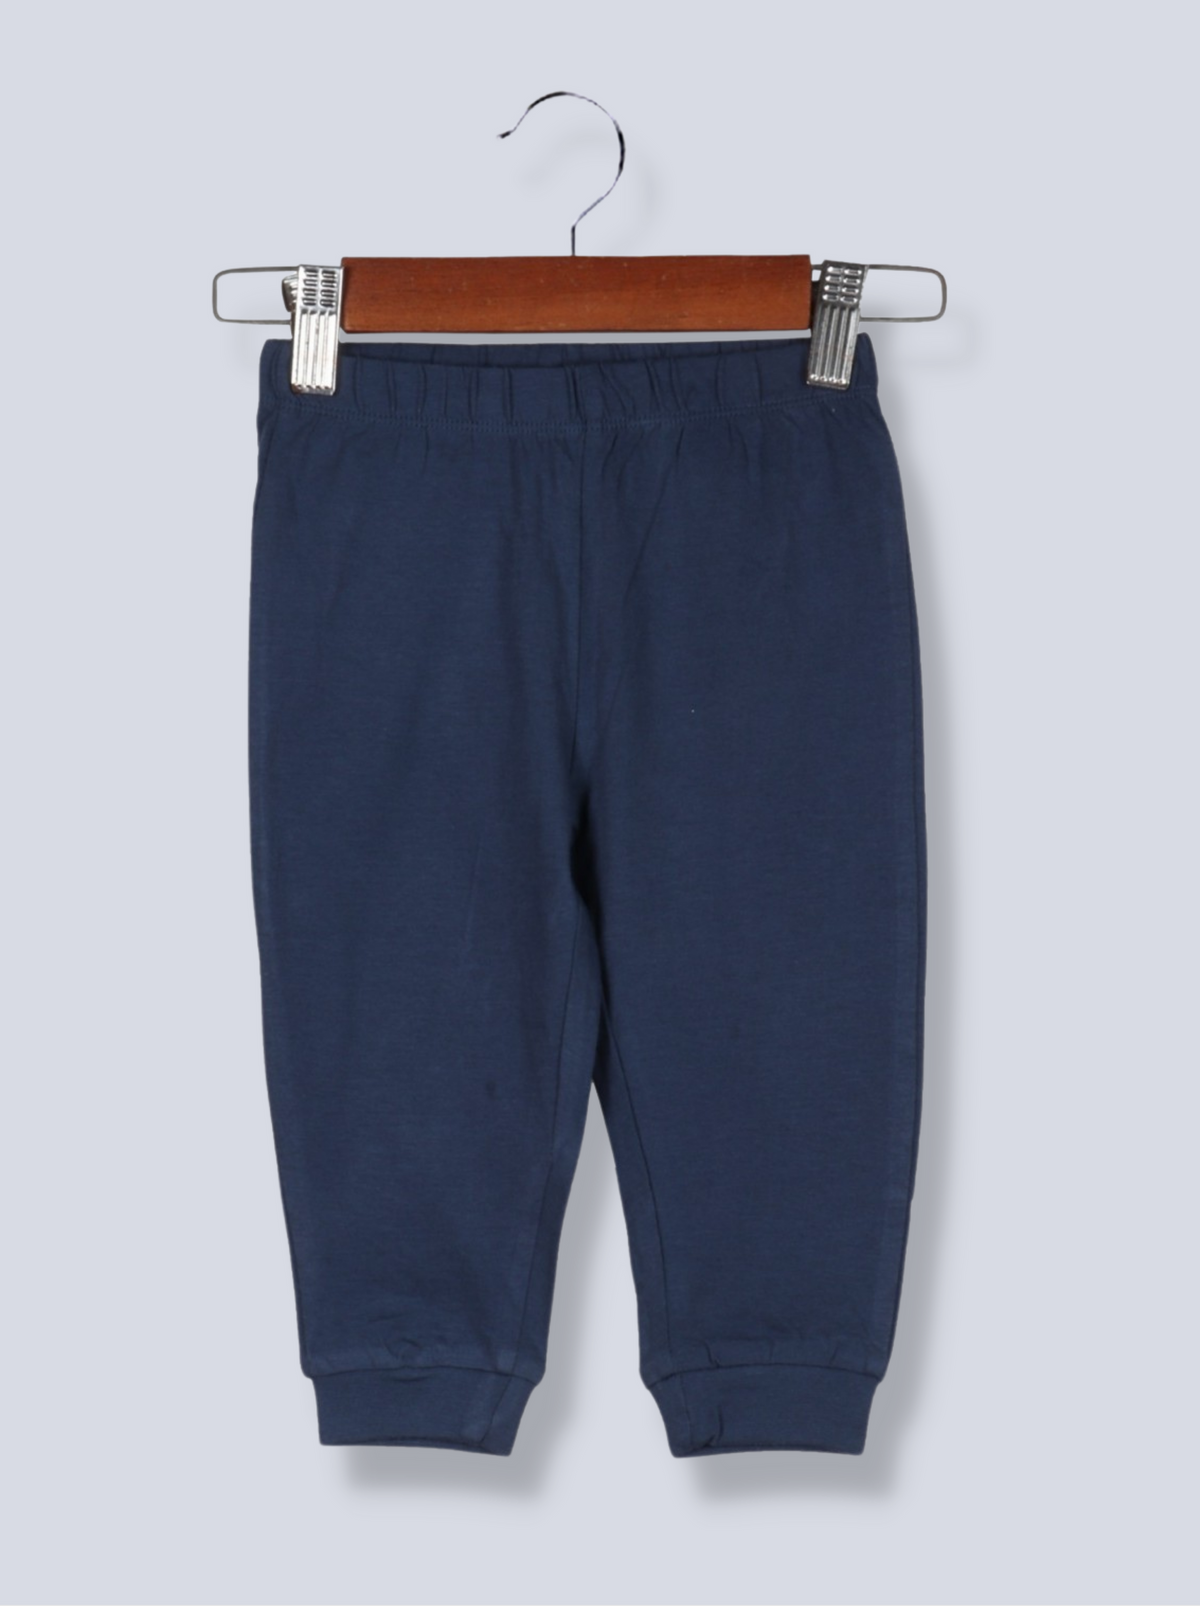 Kids Navy Cotton jersey knit Solid Pant